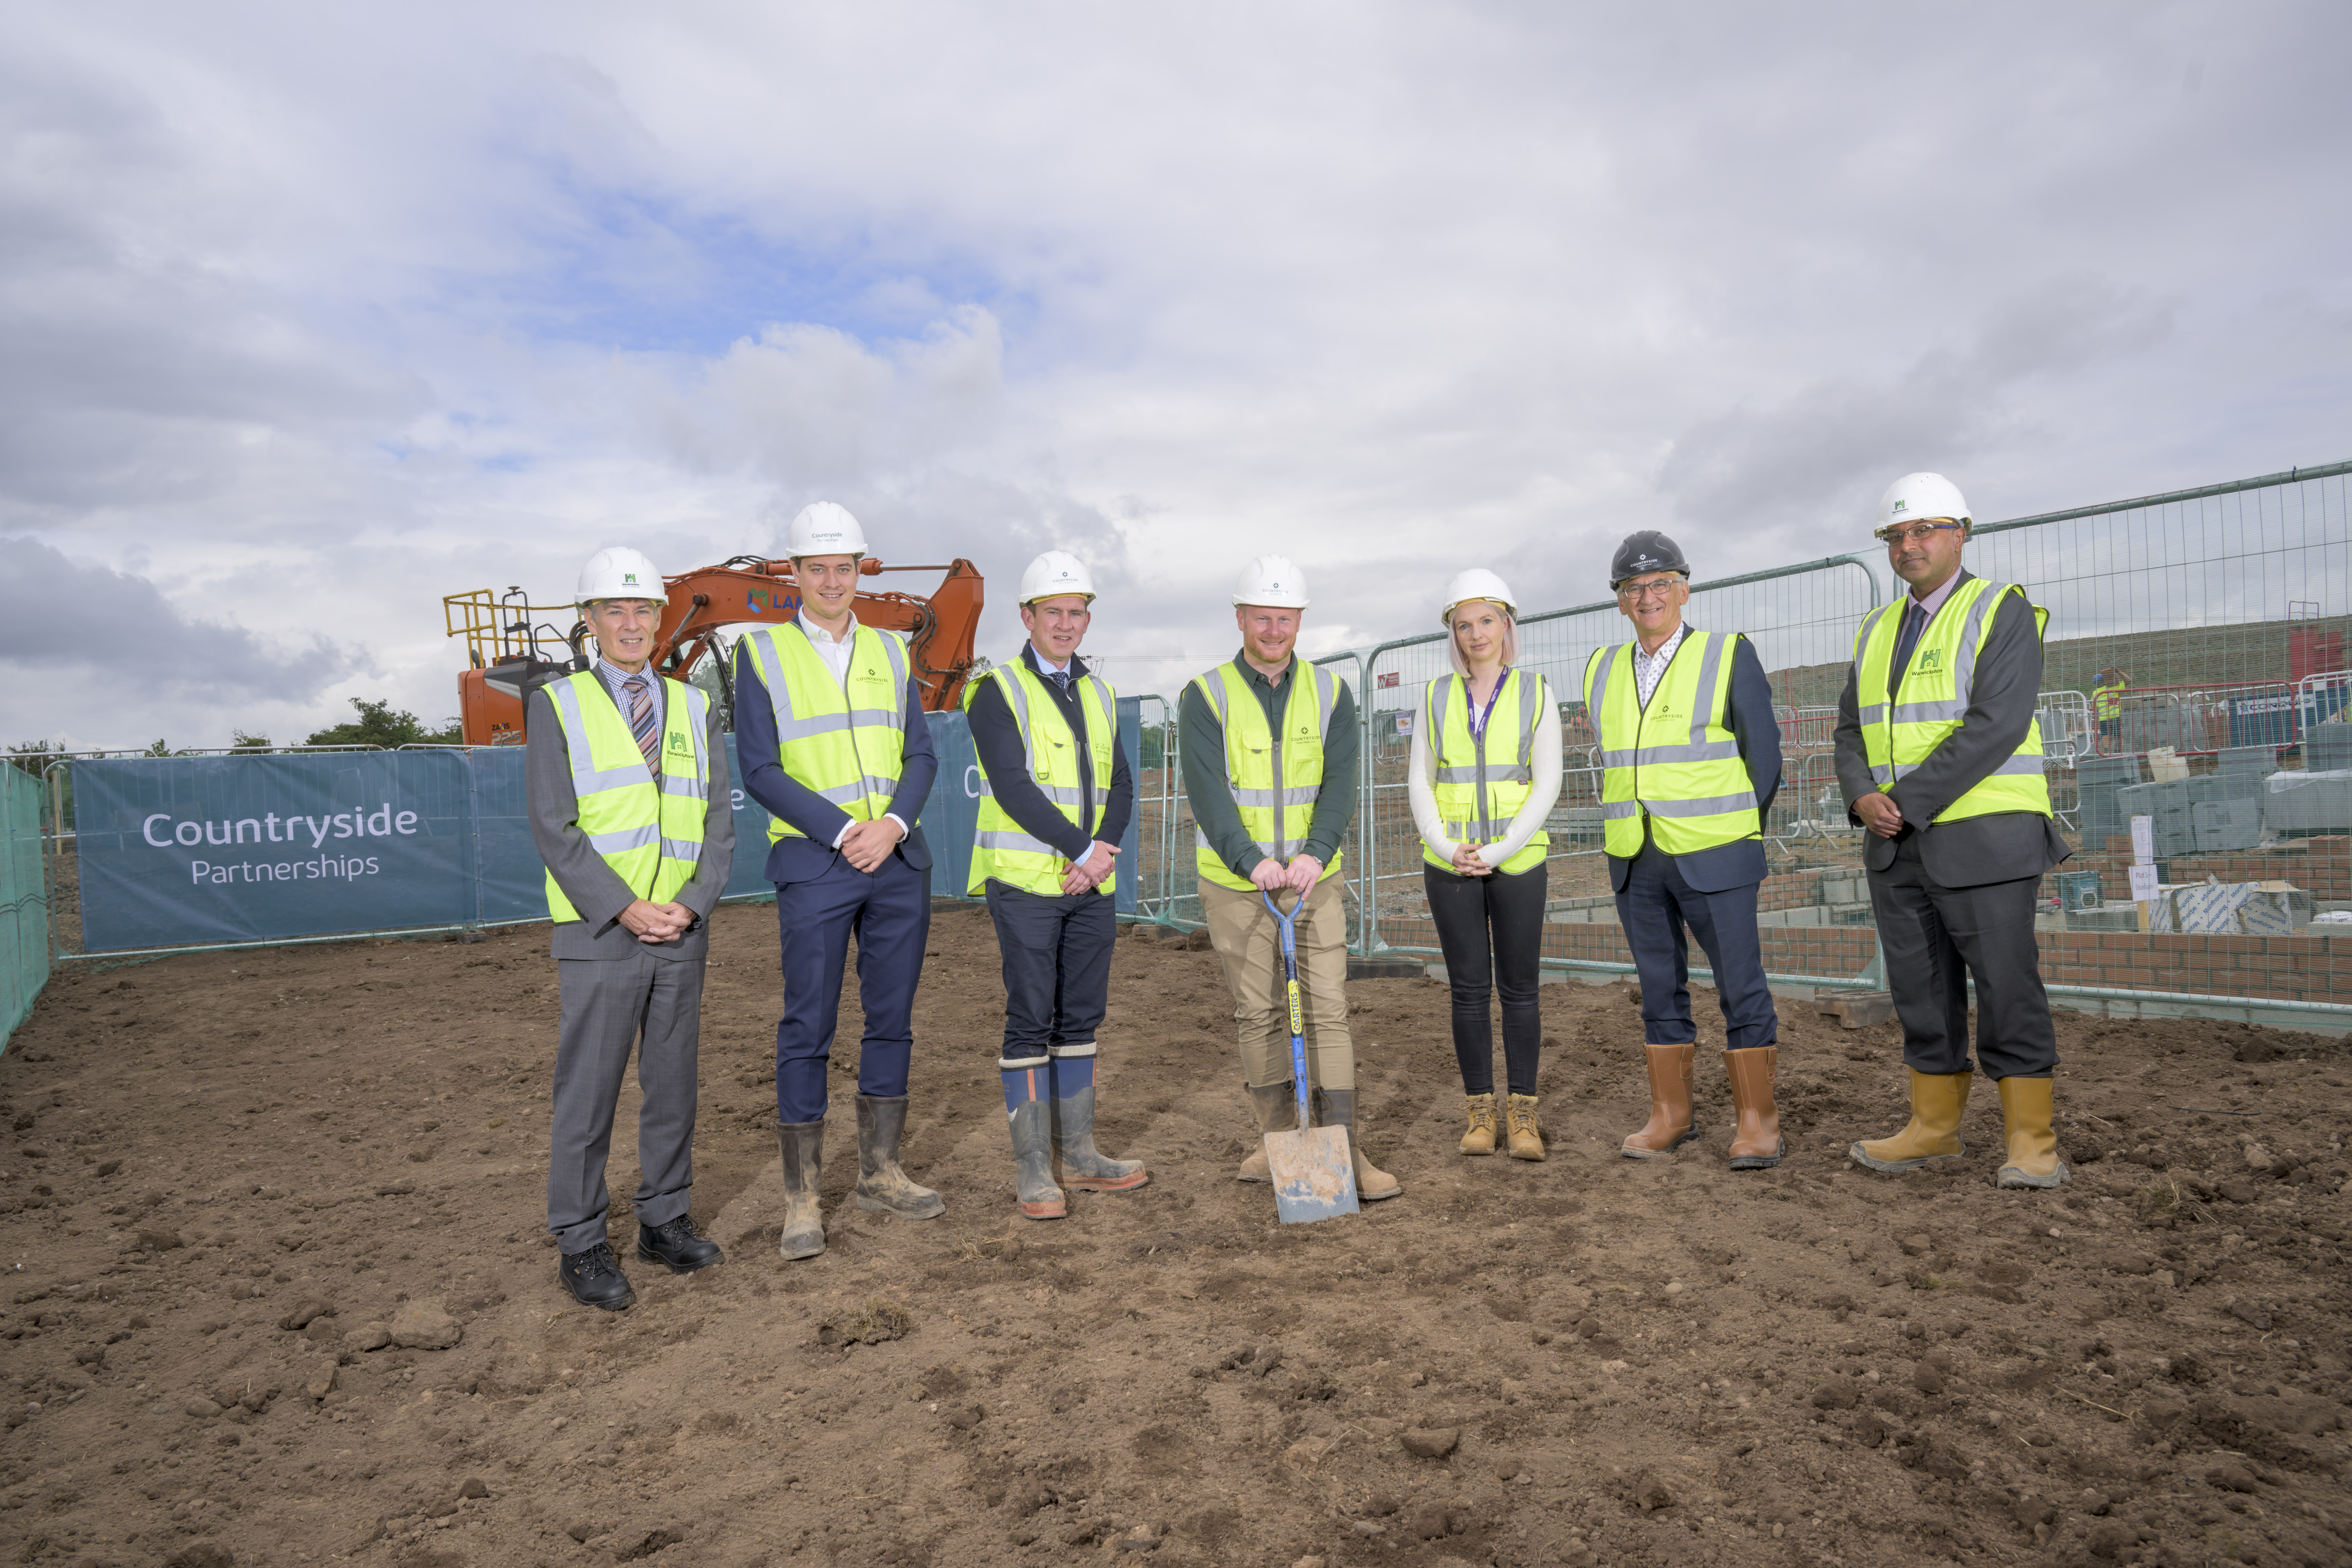 Countryside Partnerships, Warwickshire County Council and Warwickshire Property and Development Group (WPDG) get first homes underway as part of £2.5bn joint venture